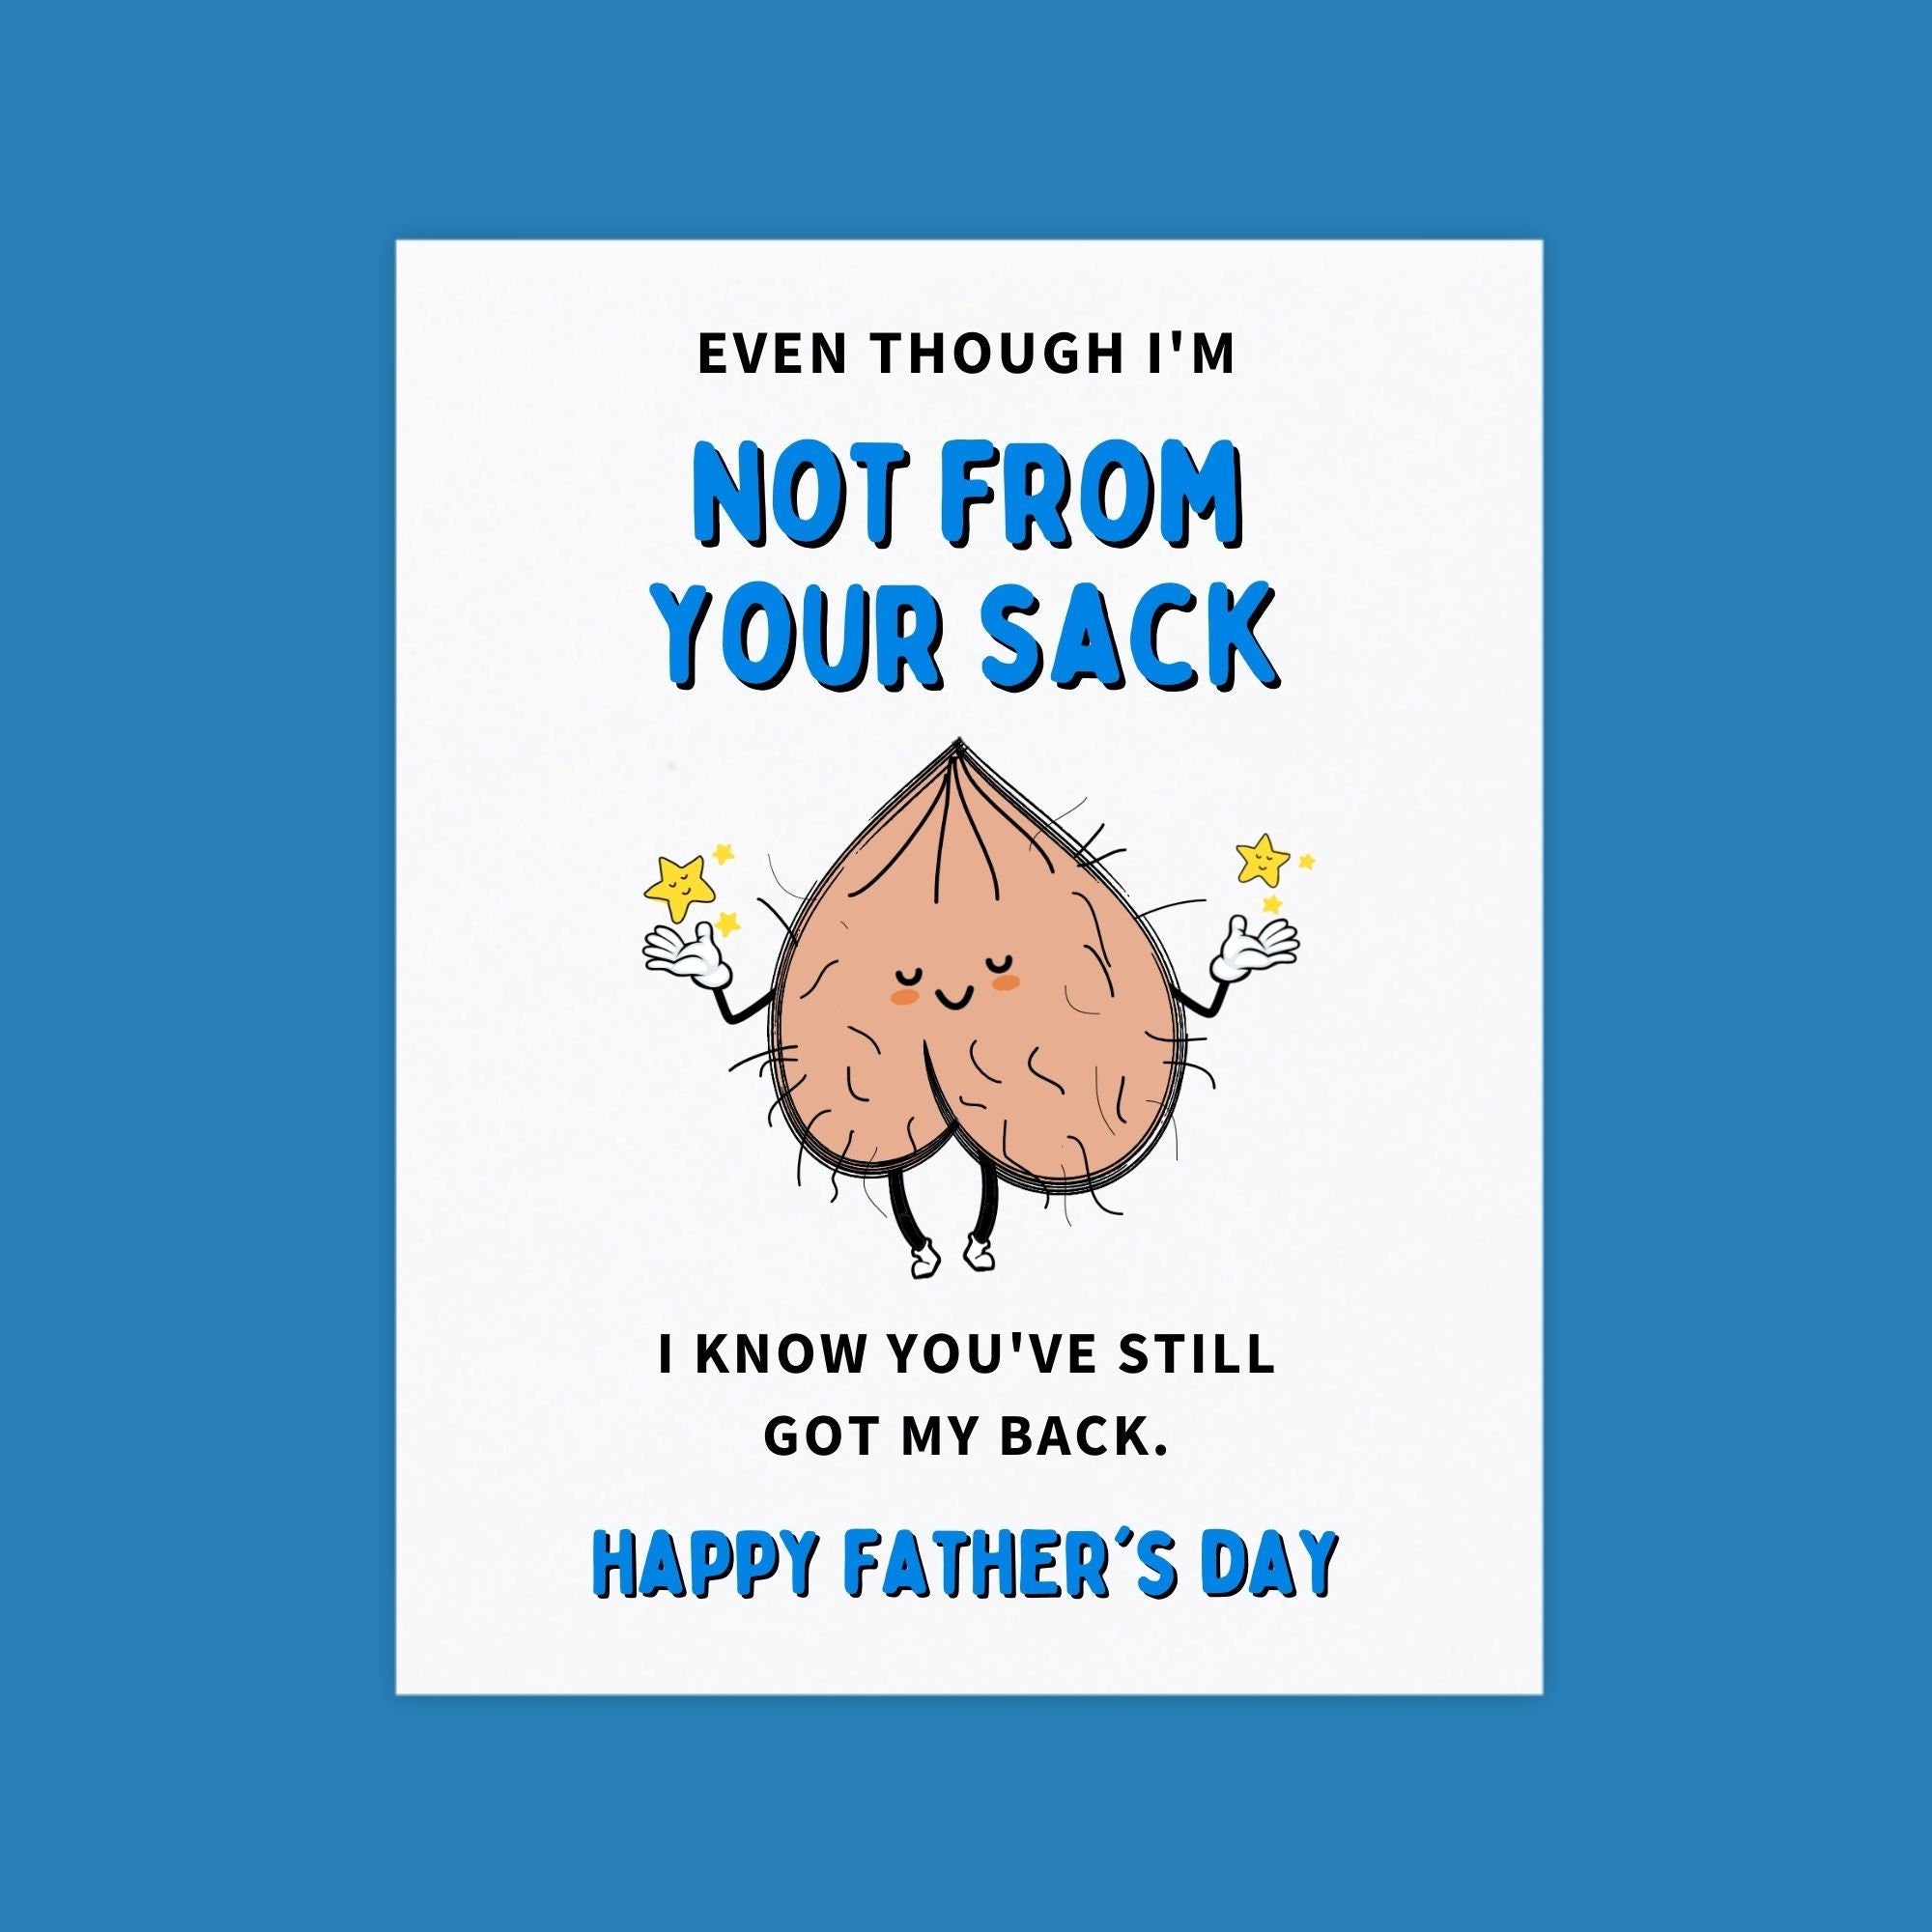 Funny Father's Day Card, Not From Your Sack, Still got my back card, Step dad, father card, step dad funny cards, rude funny humour card